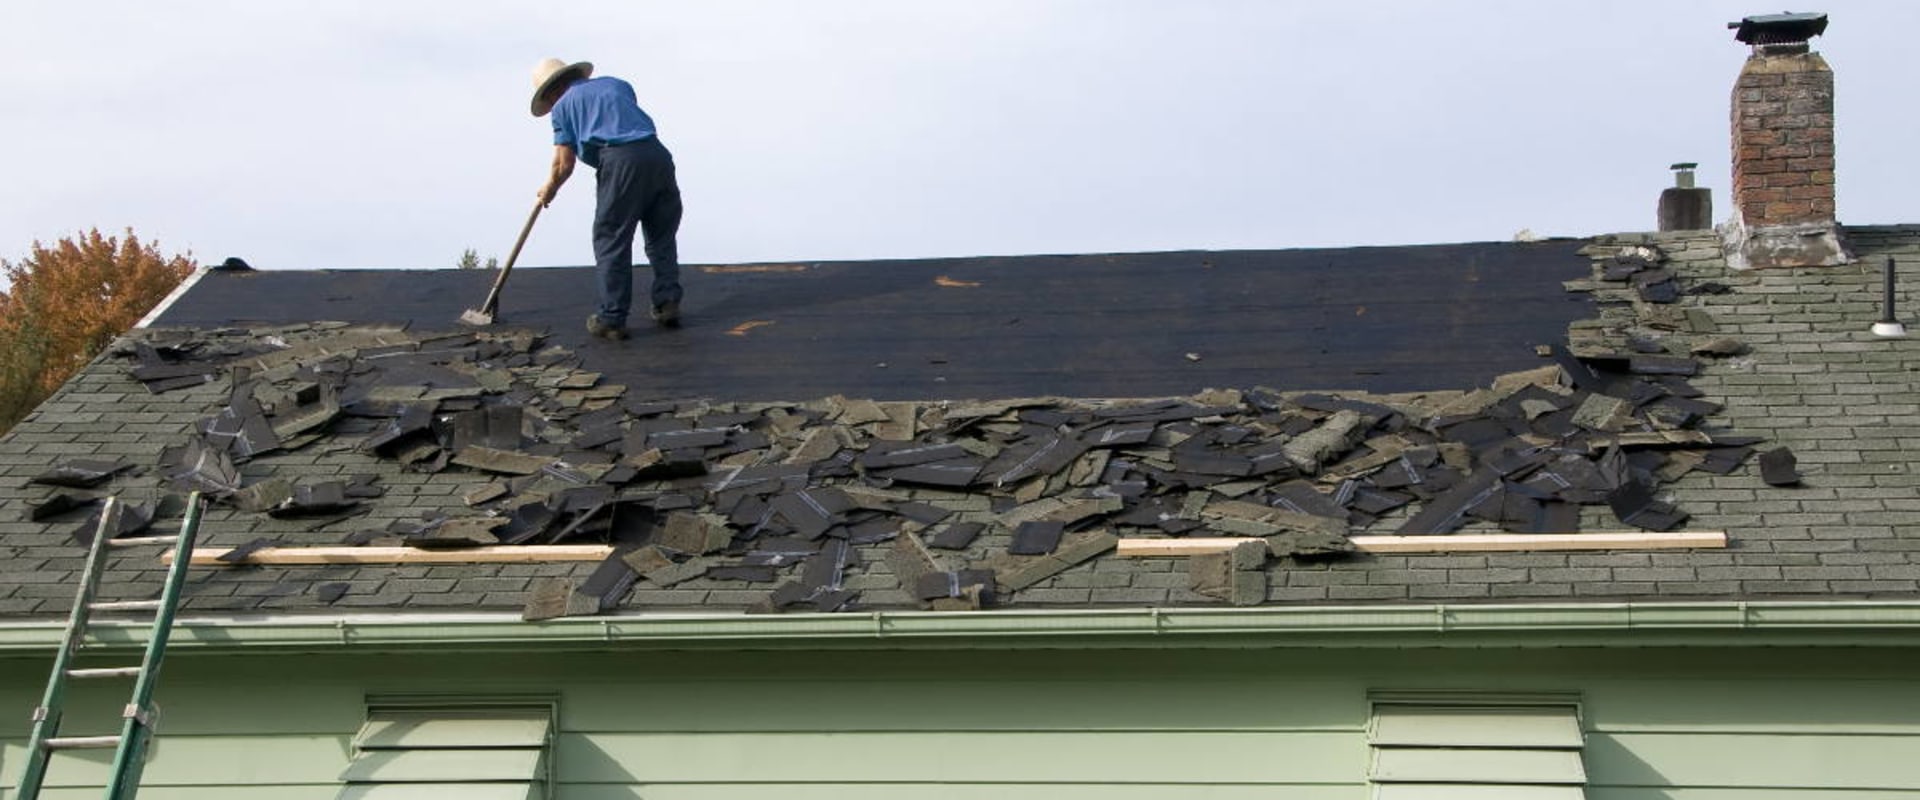 Should You Replace Your Entire Roof or Just Part of It?